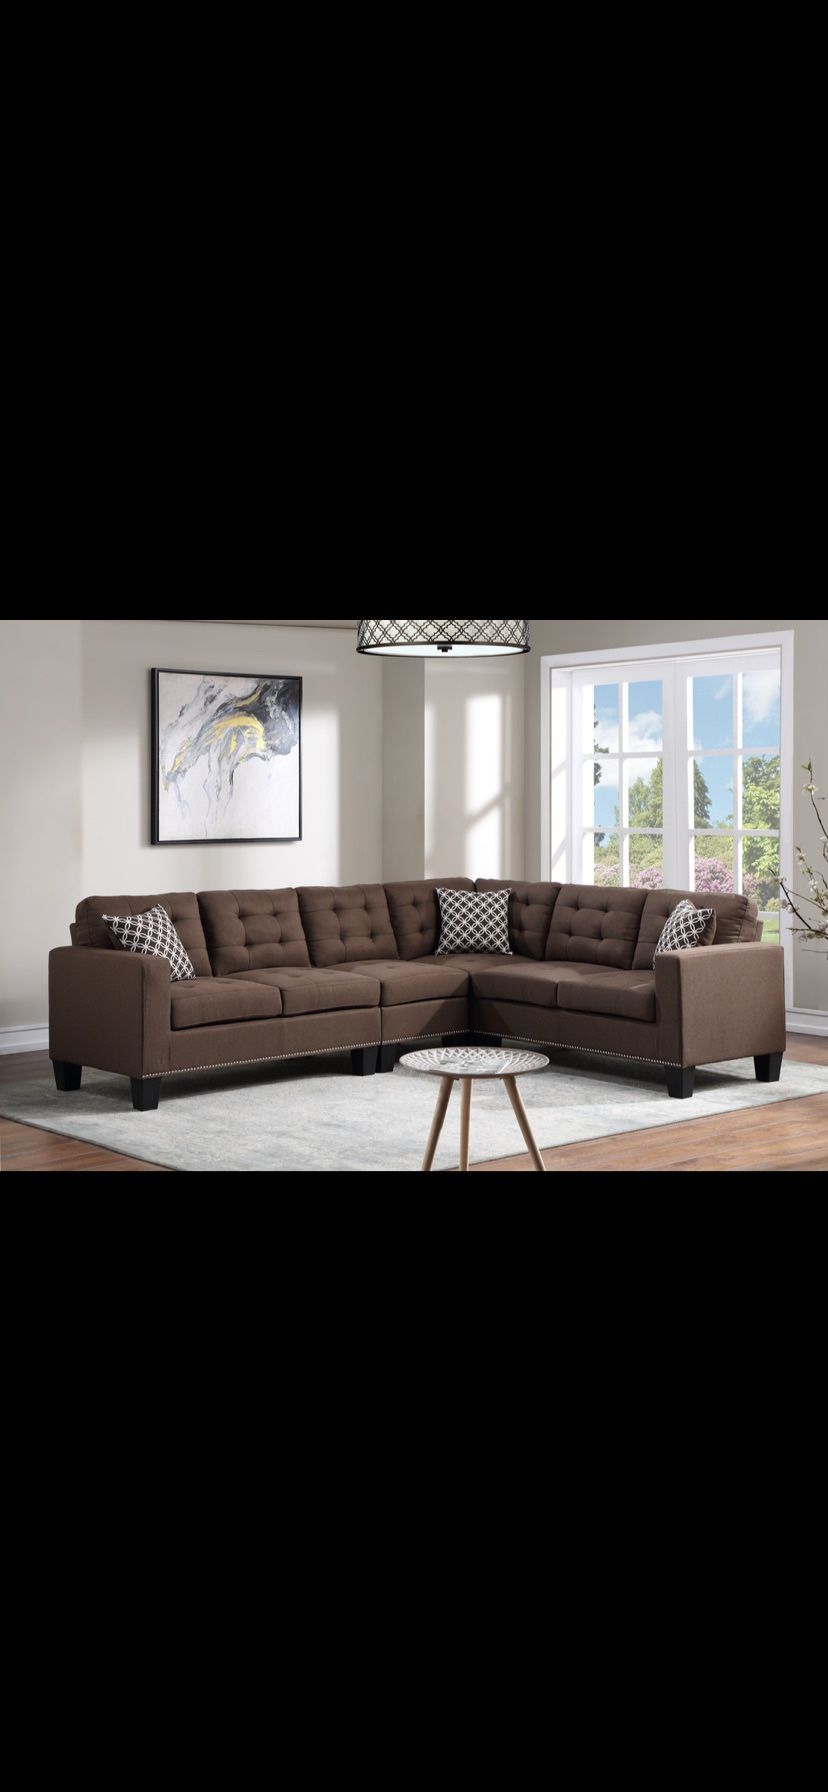 New Sectional Nailheads 